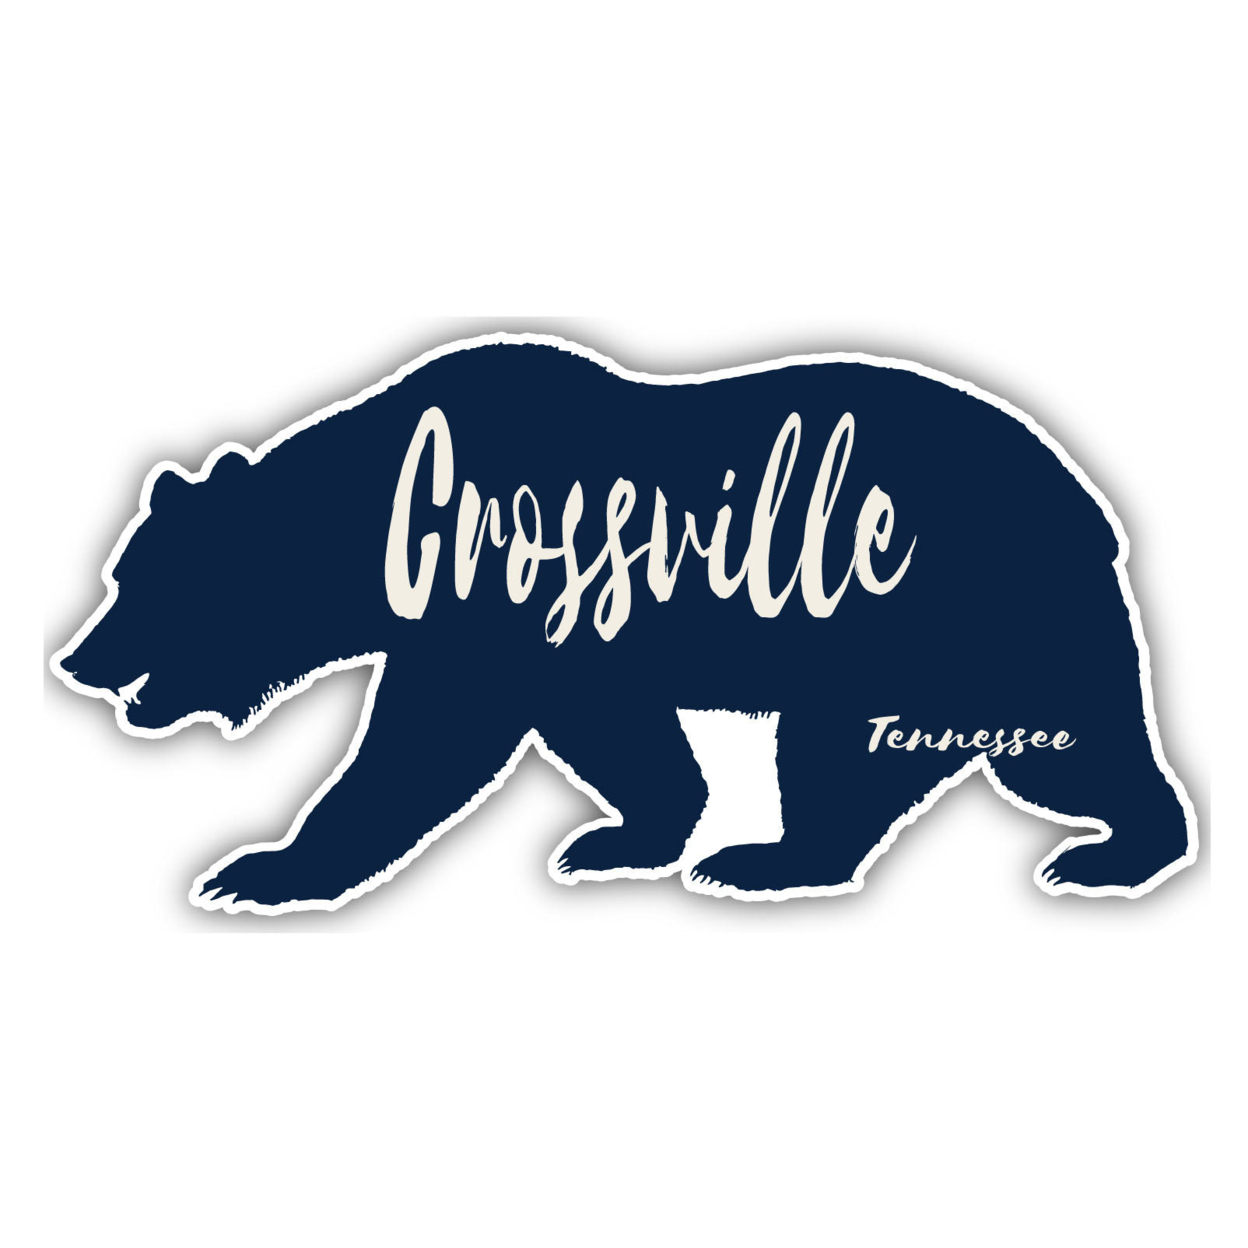 Crossville Tennessee Souvenir Decorative Stickers (Choose Theme And Size) - Single Unit, 2-Inch, Tent